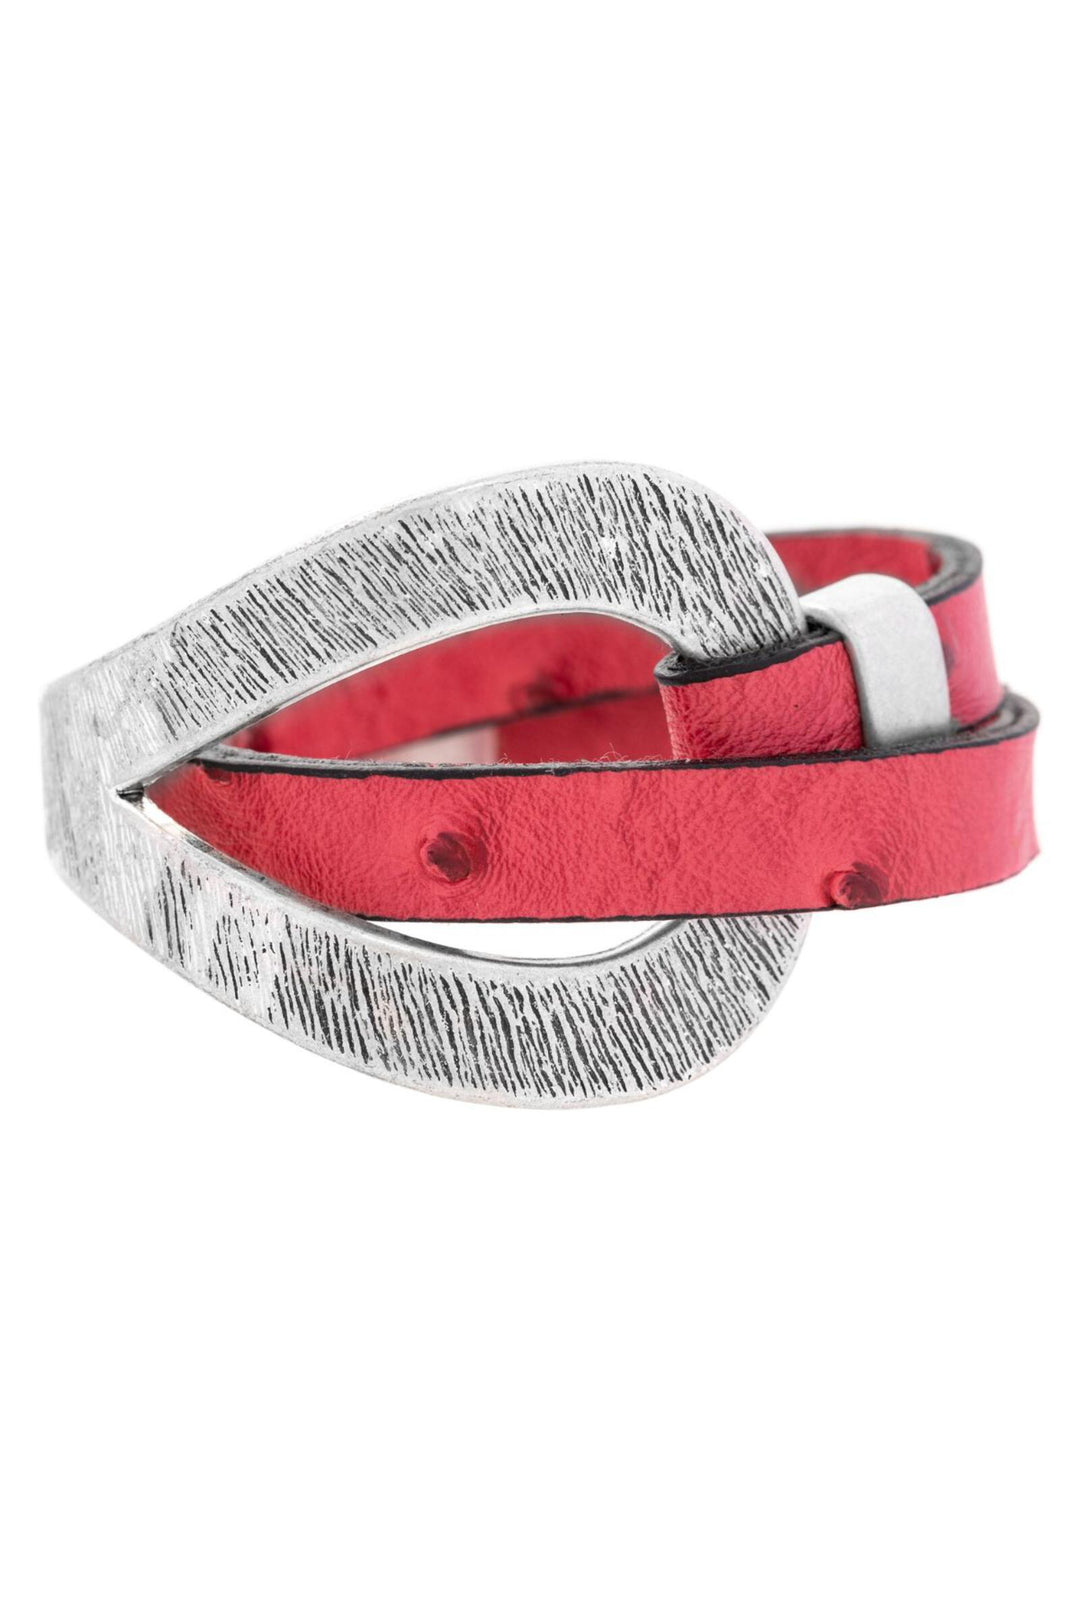 Hammered Double Wrap Leather Red